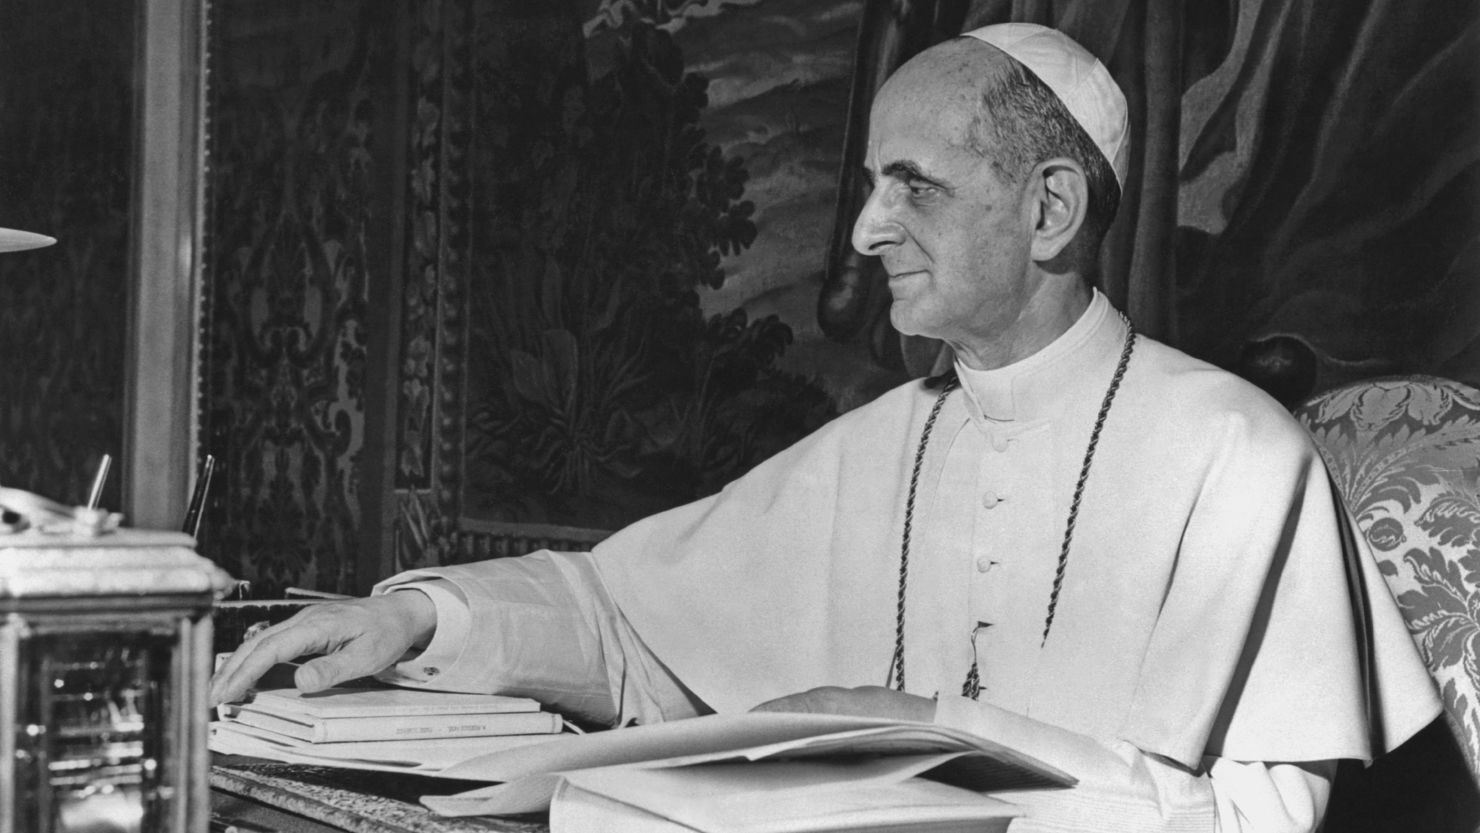 Pope Paul VI was "one of the most traveled popes in history and the first to visit five continents," according to the Vatican.